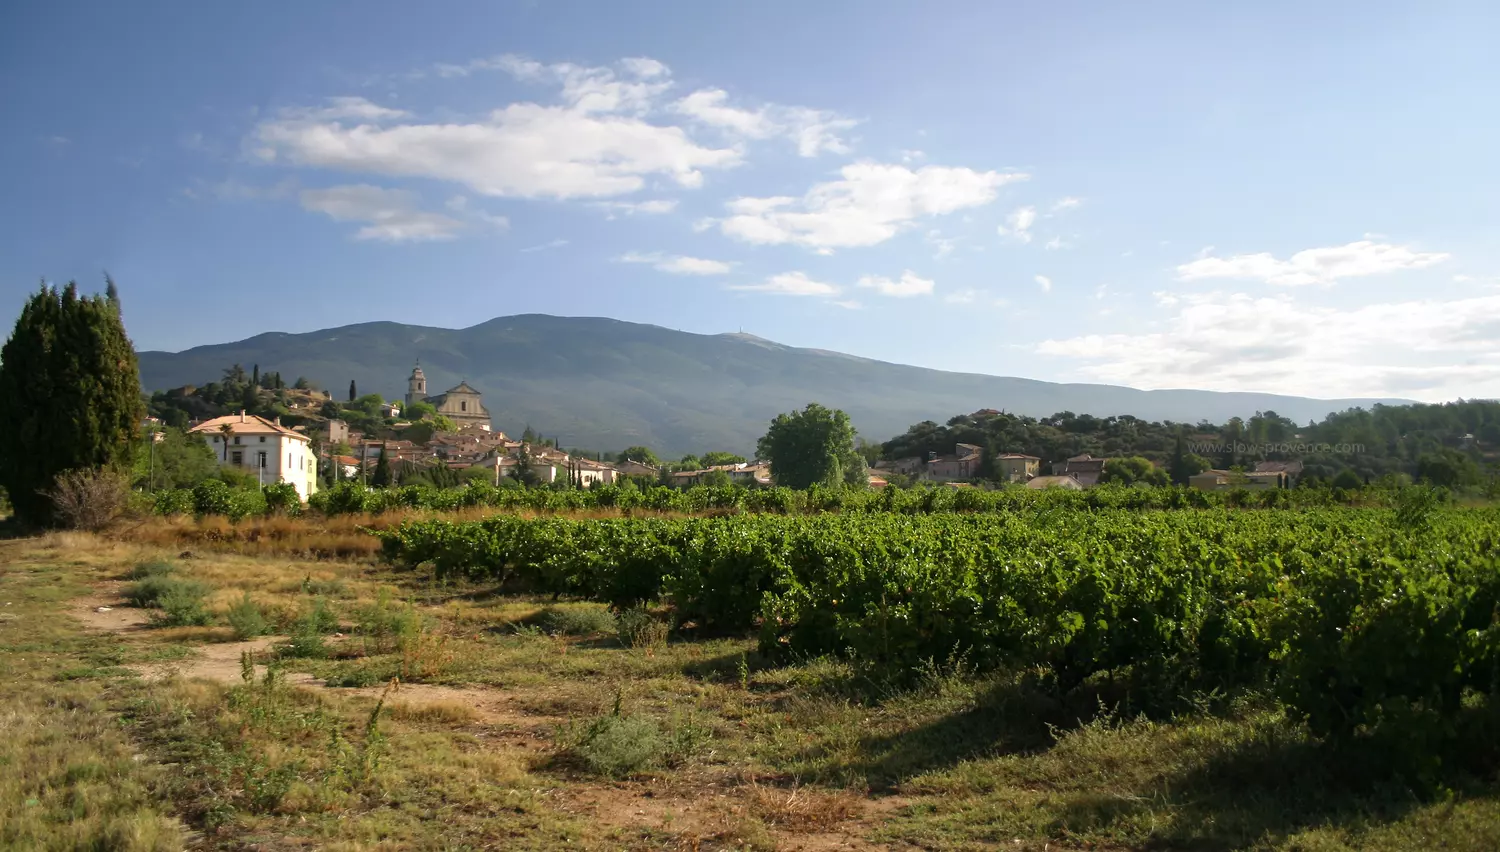 What to do in September in Provence?